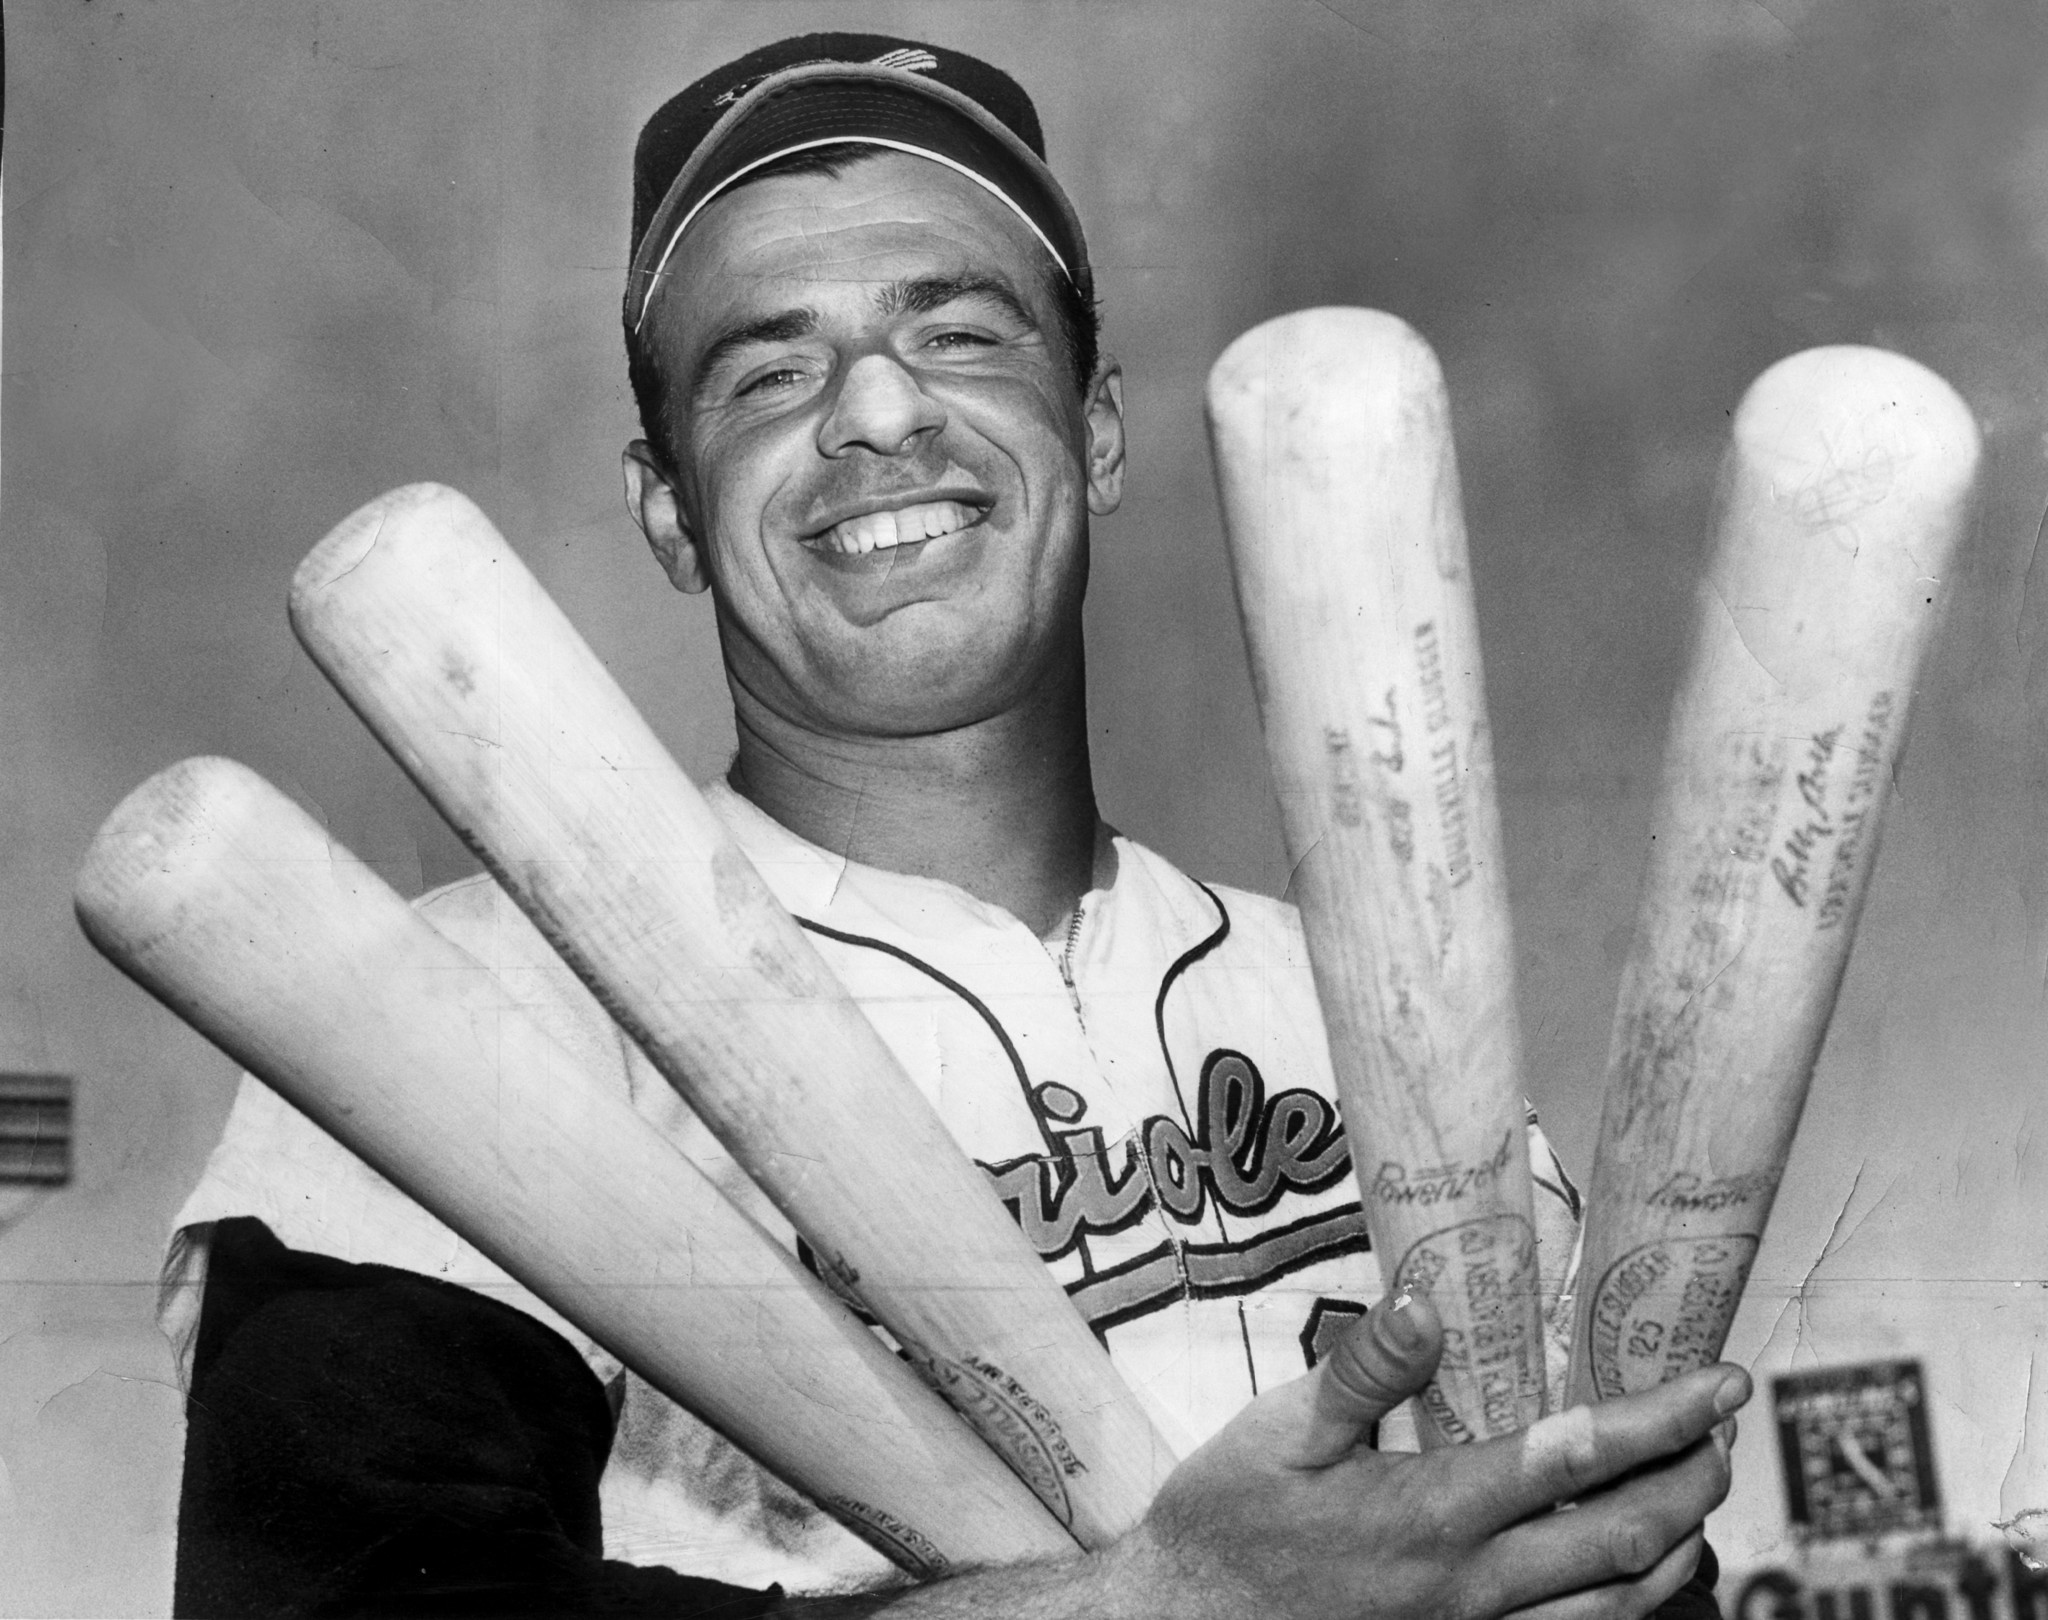 Orioles All-Star catcher Gus Triandos is pictured in 1959.